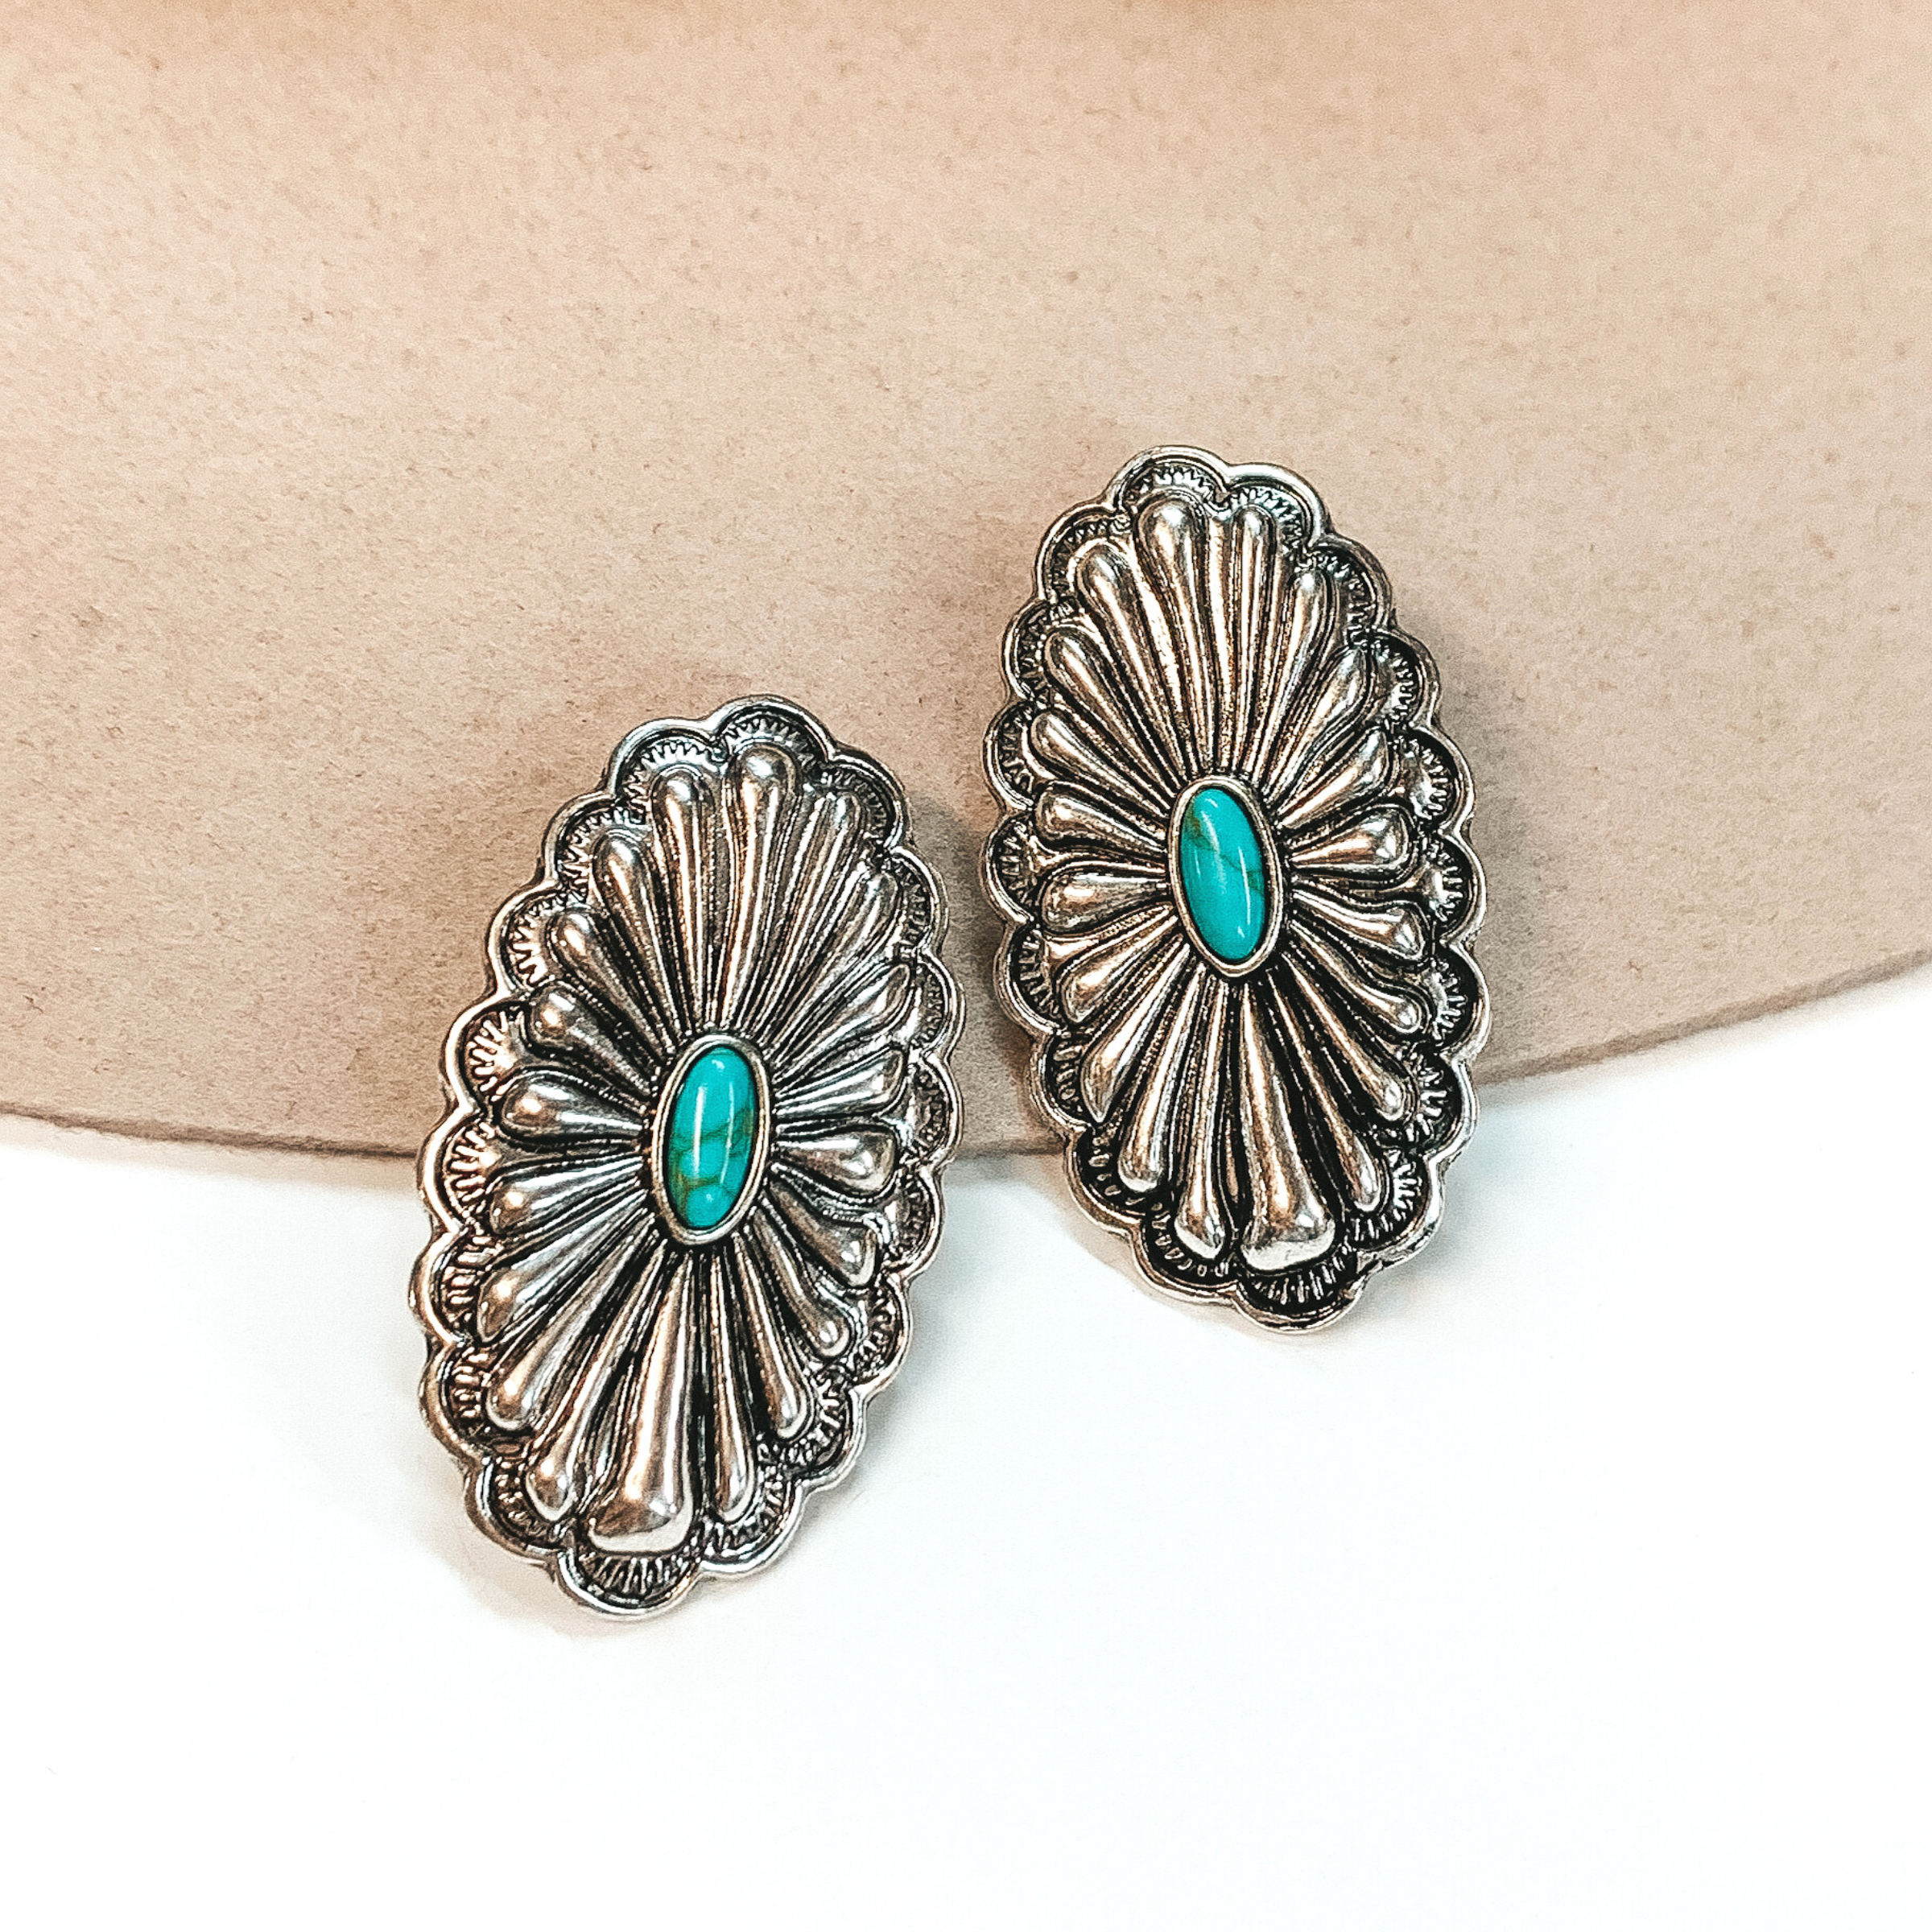 Silver, oval concho earrings with a western design. There is a center, oval turquoise stone. These earrings are pictured on a white and beige background. 